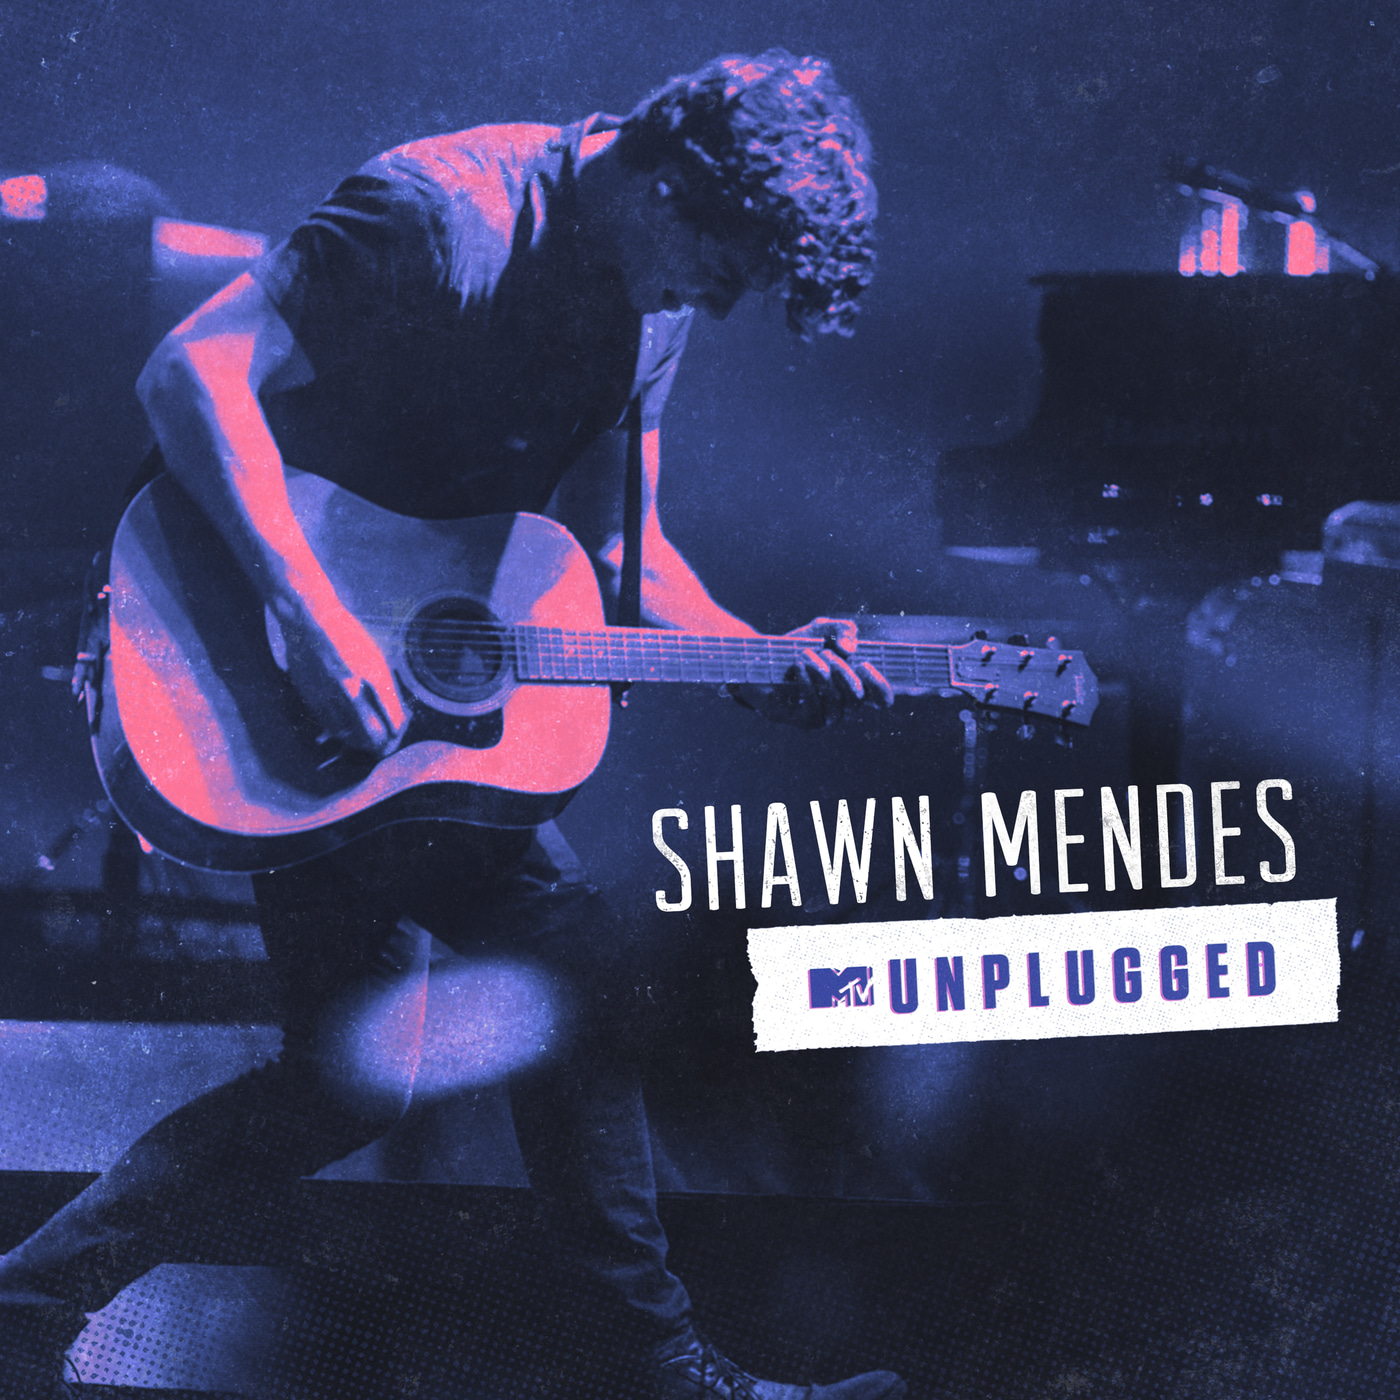 Shawn Mendes-Never Be Alone (MTV Unplugged)